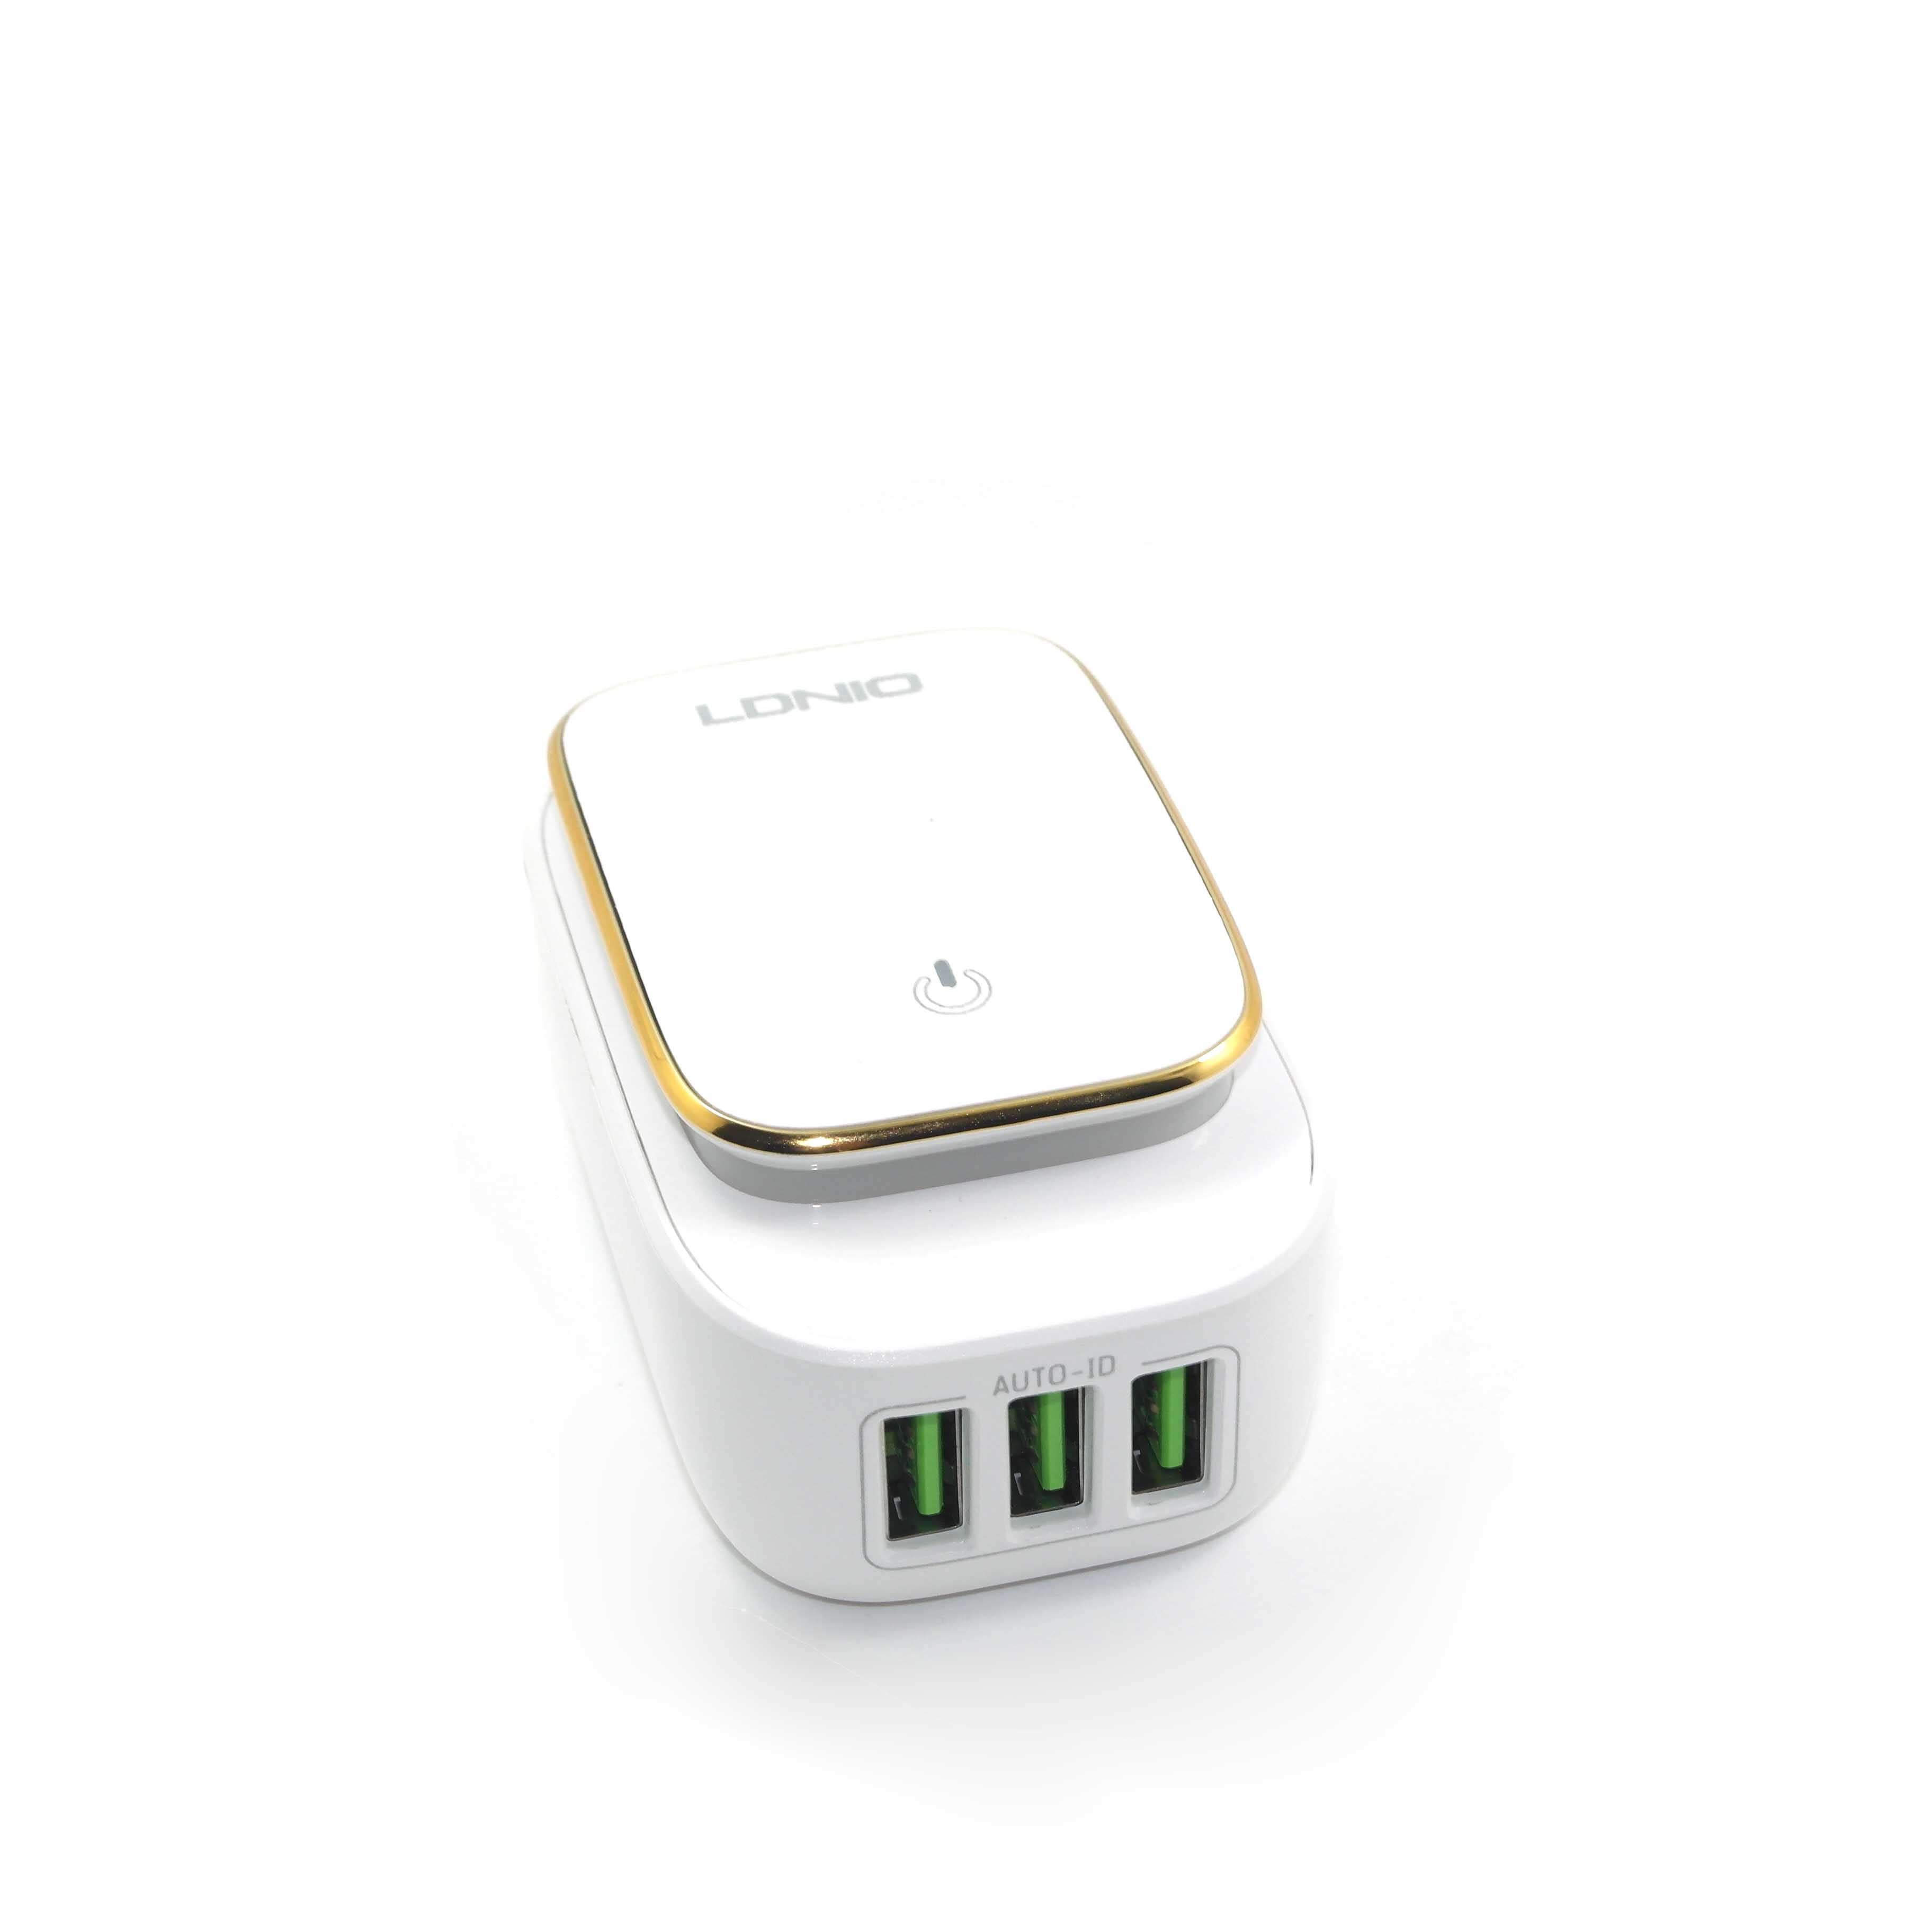 KRE-5V3.4A,5V3.4 A 17W travel charger, three USB charger, with touch night light